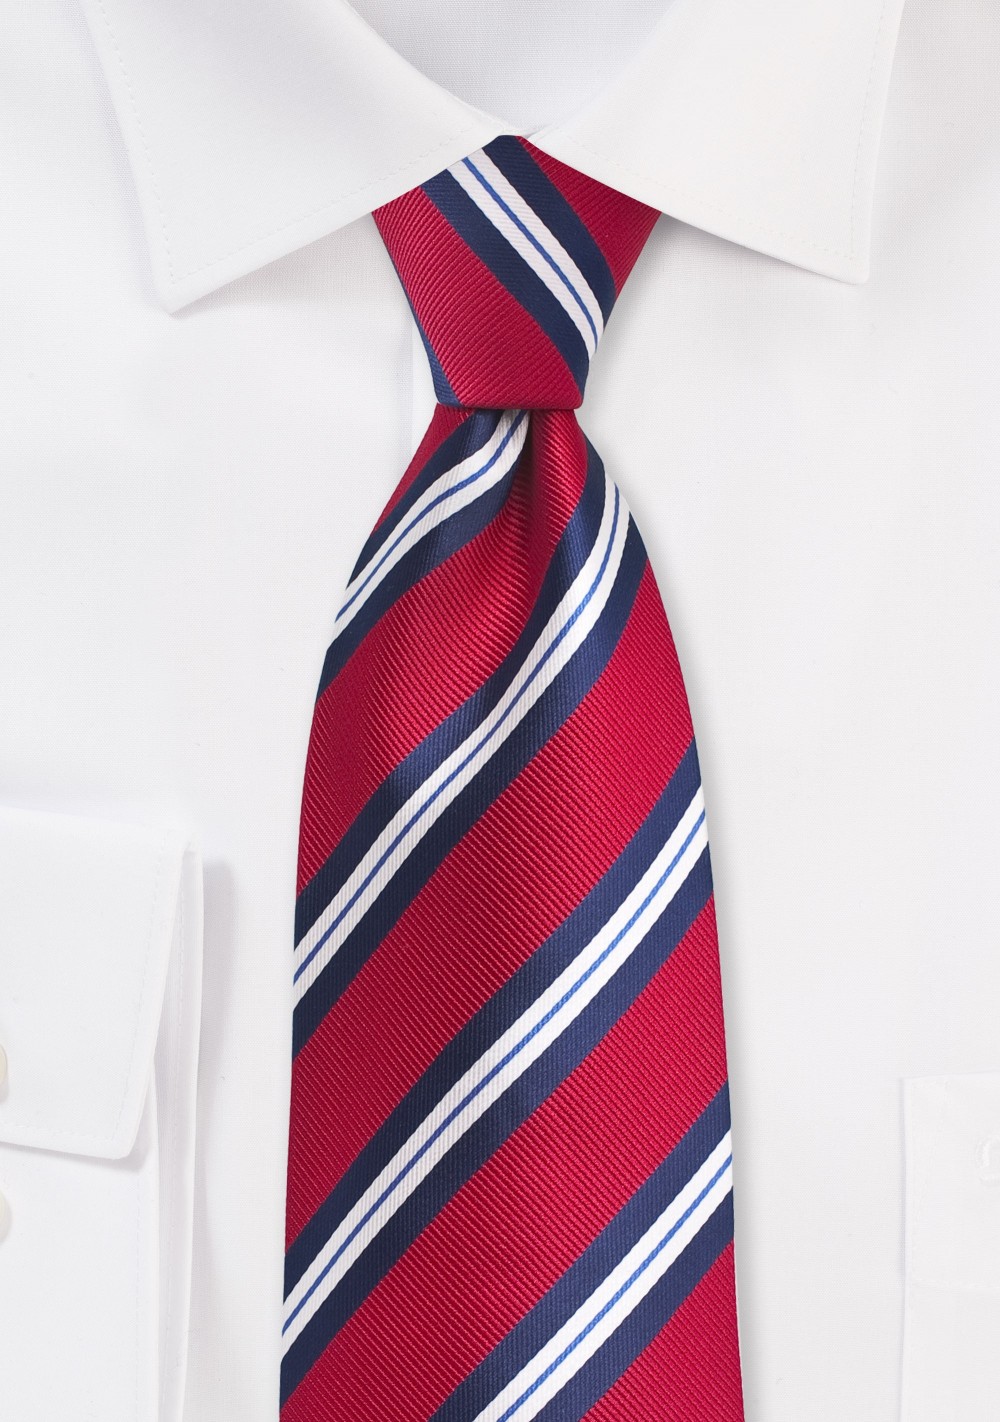 Repp Striped Tie in Red and Blue in XL